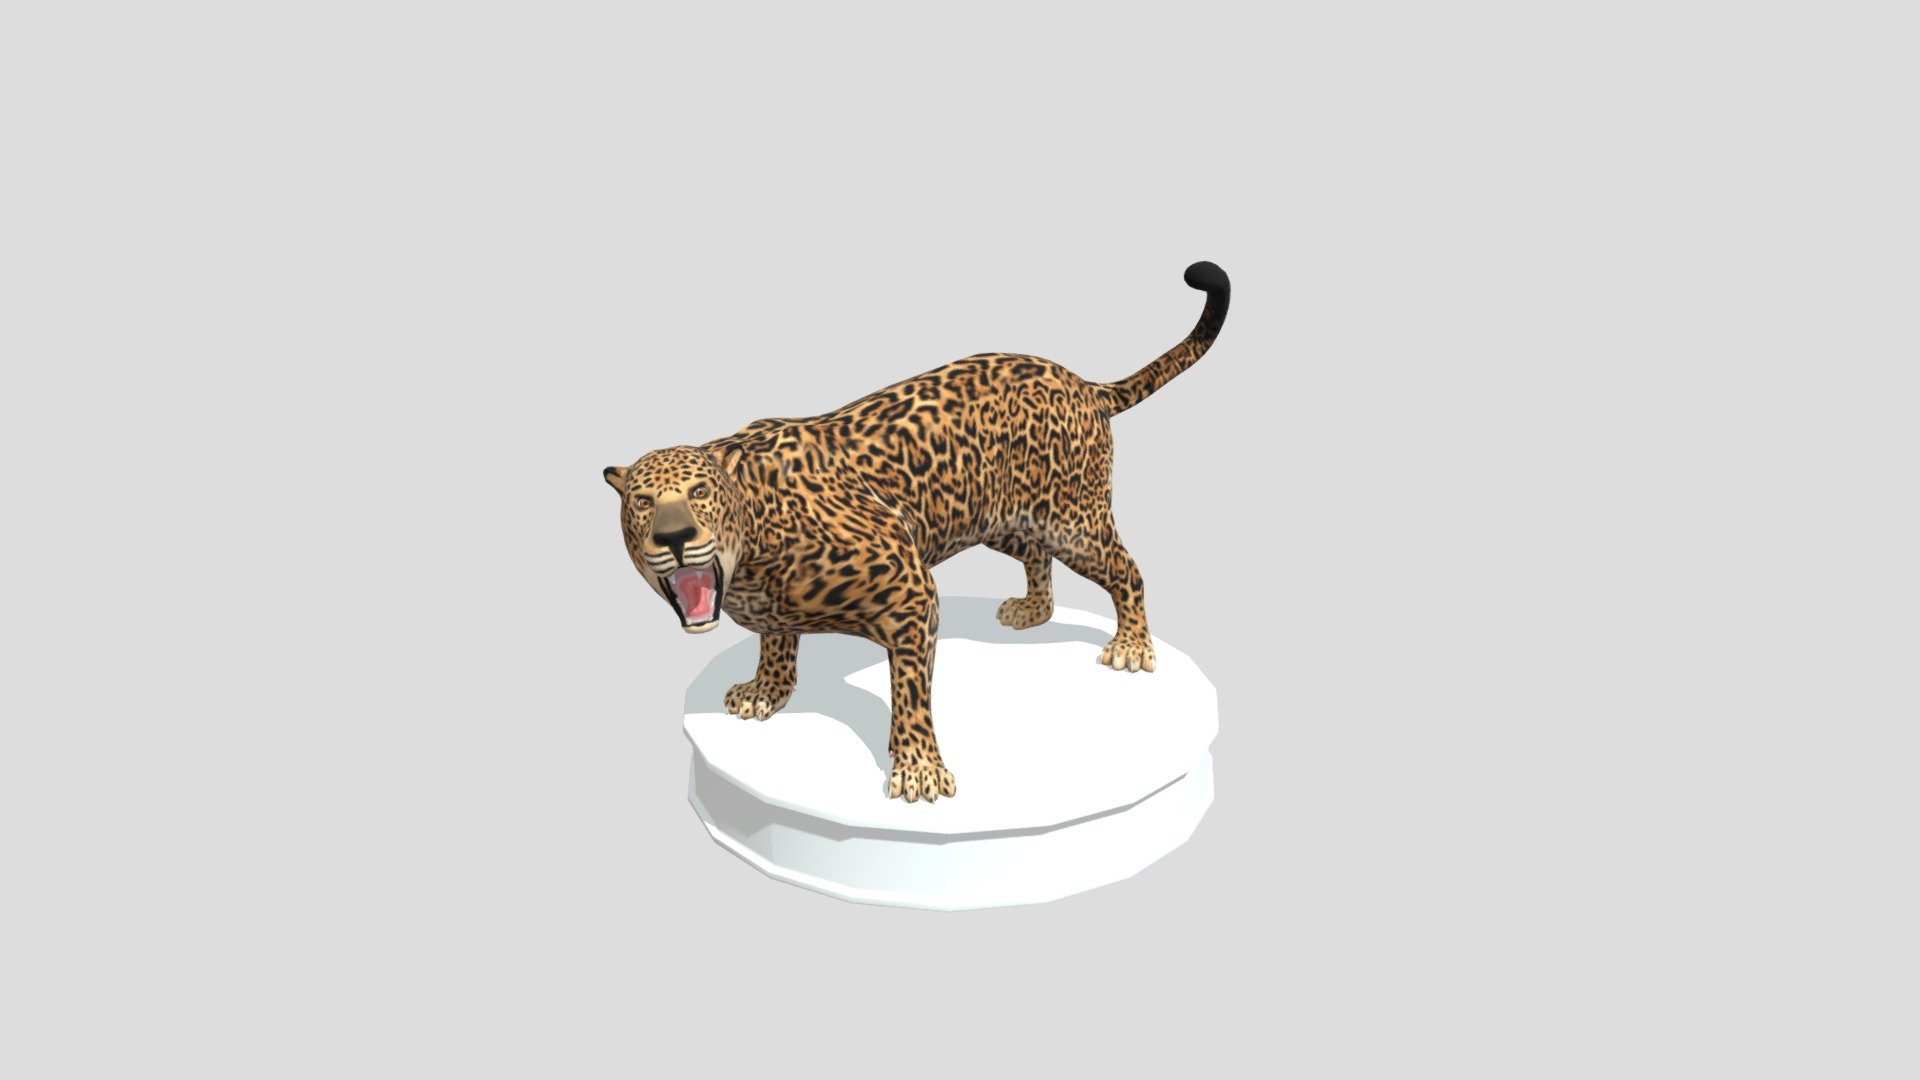 Second model for the same project.
Already with retopology done and texture.

Reviews and suggestions are requested.

Zbrush
Maya - Jaguar - 3D model by Cobas 3d model